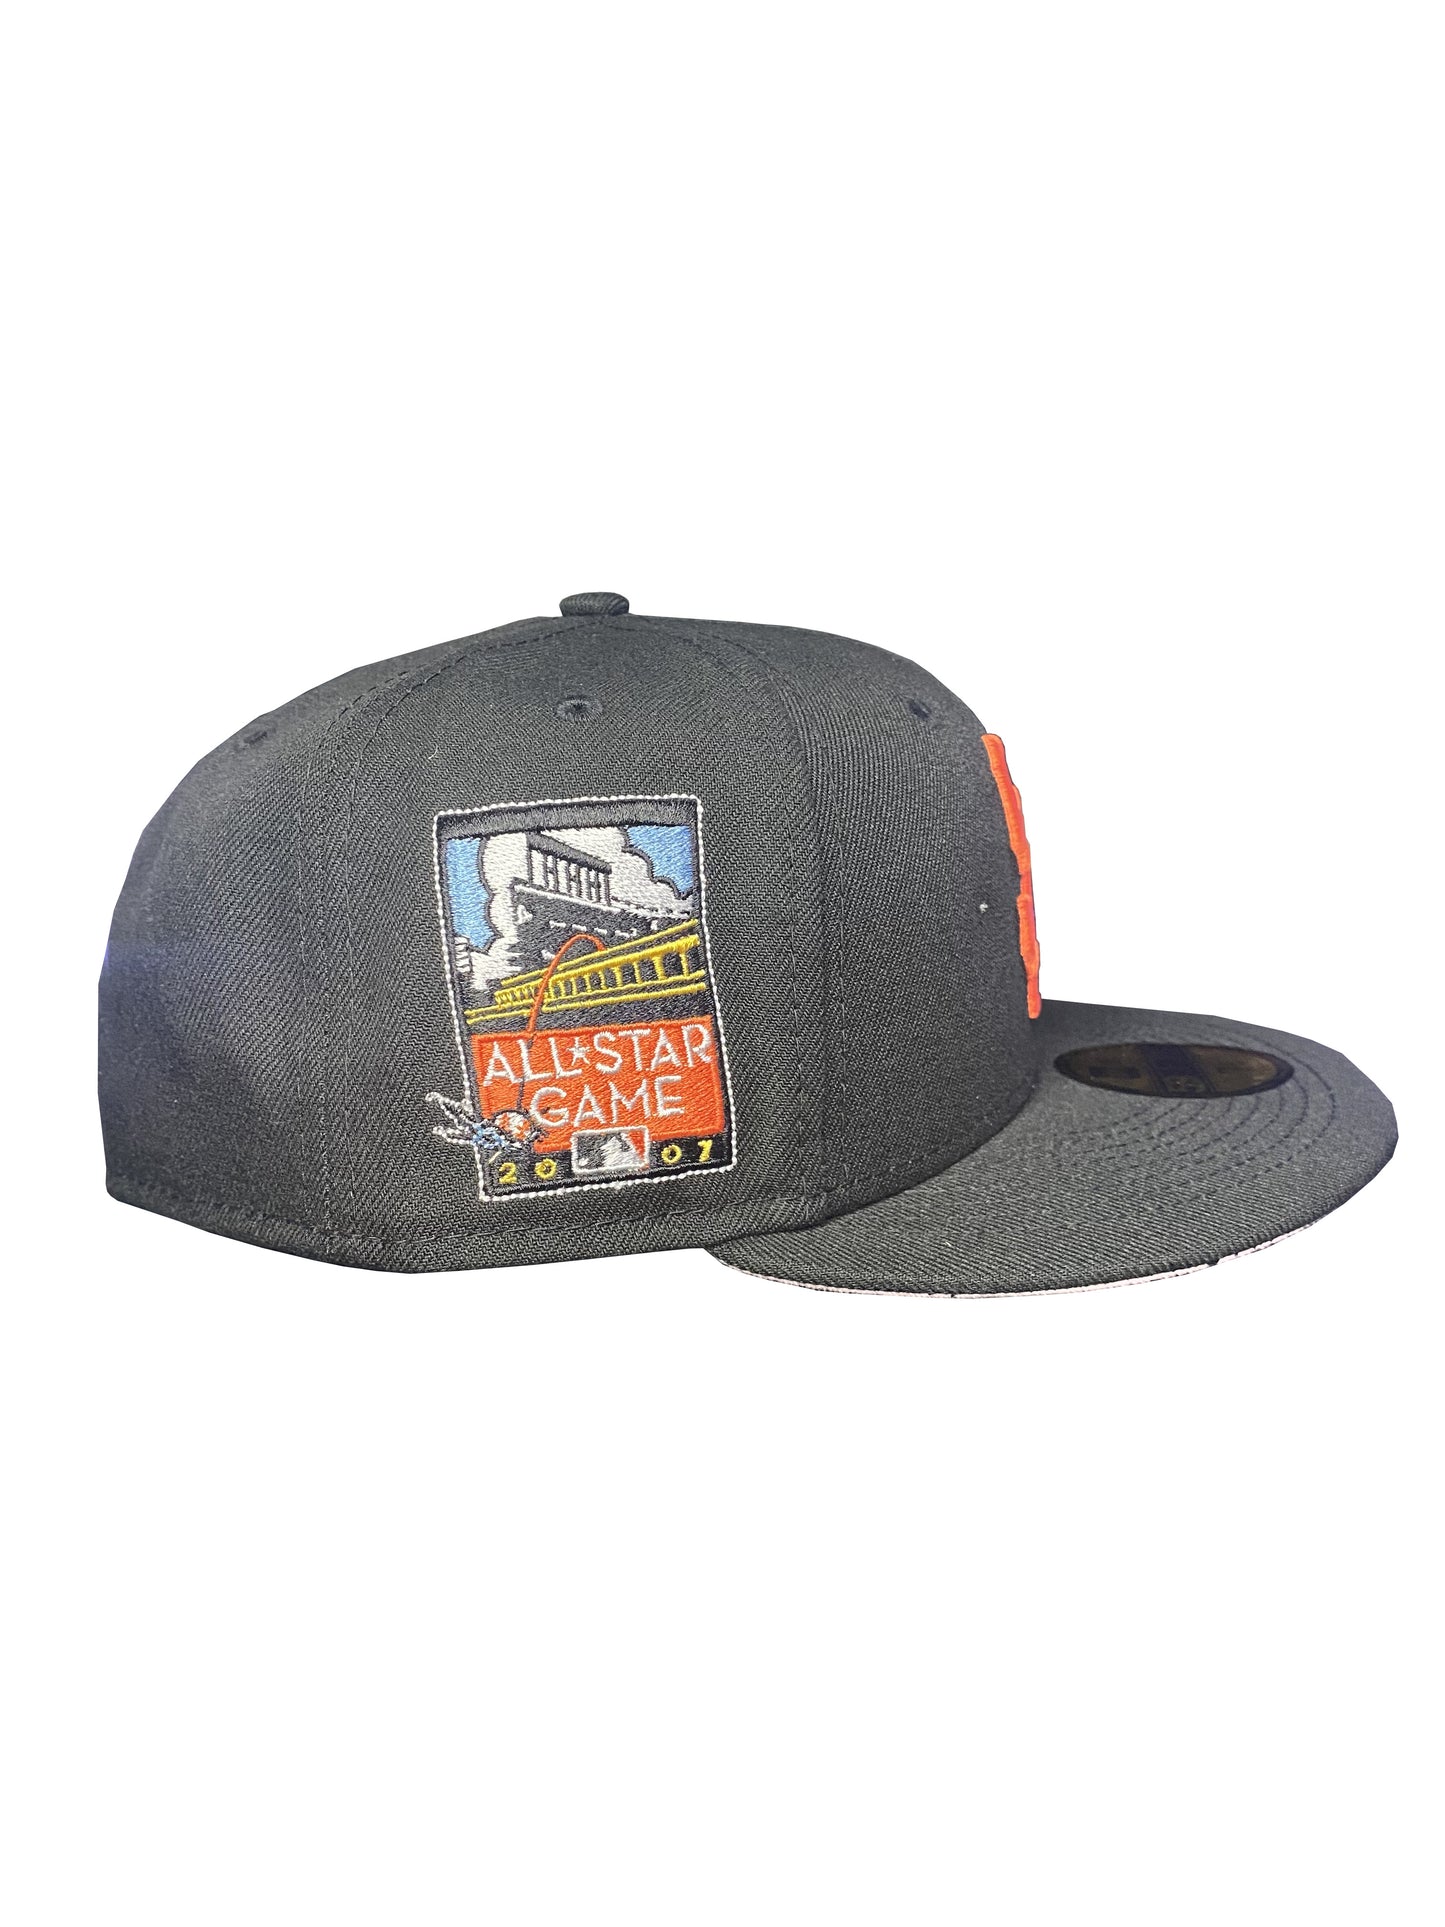 SAN FRANCISCO GIANTS ASG07 CUSTOM 59FIFTY FITTED